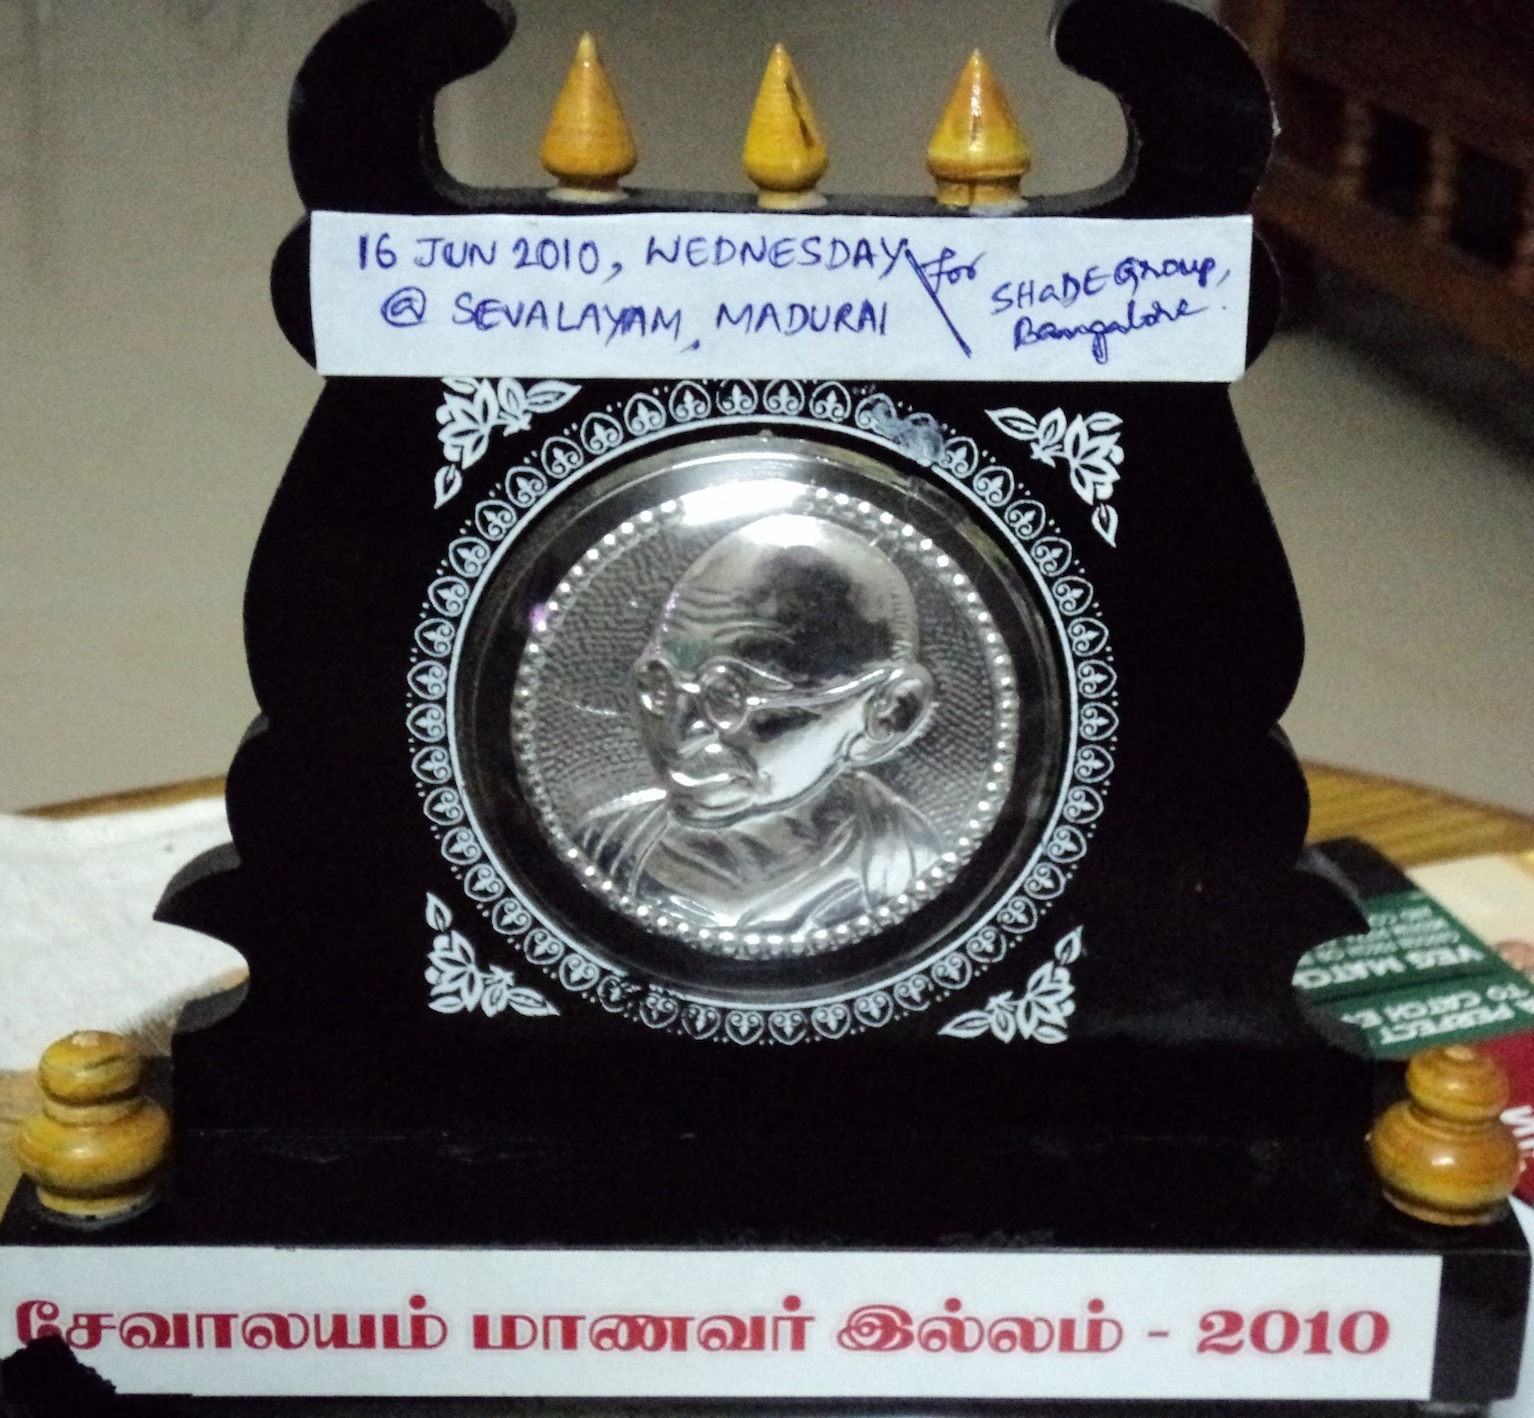 The shield from Sevalayam for the event on 16Jun2010